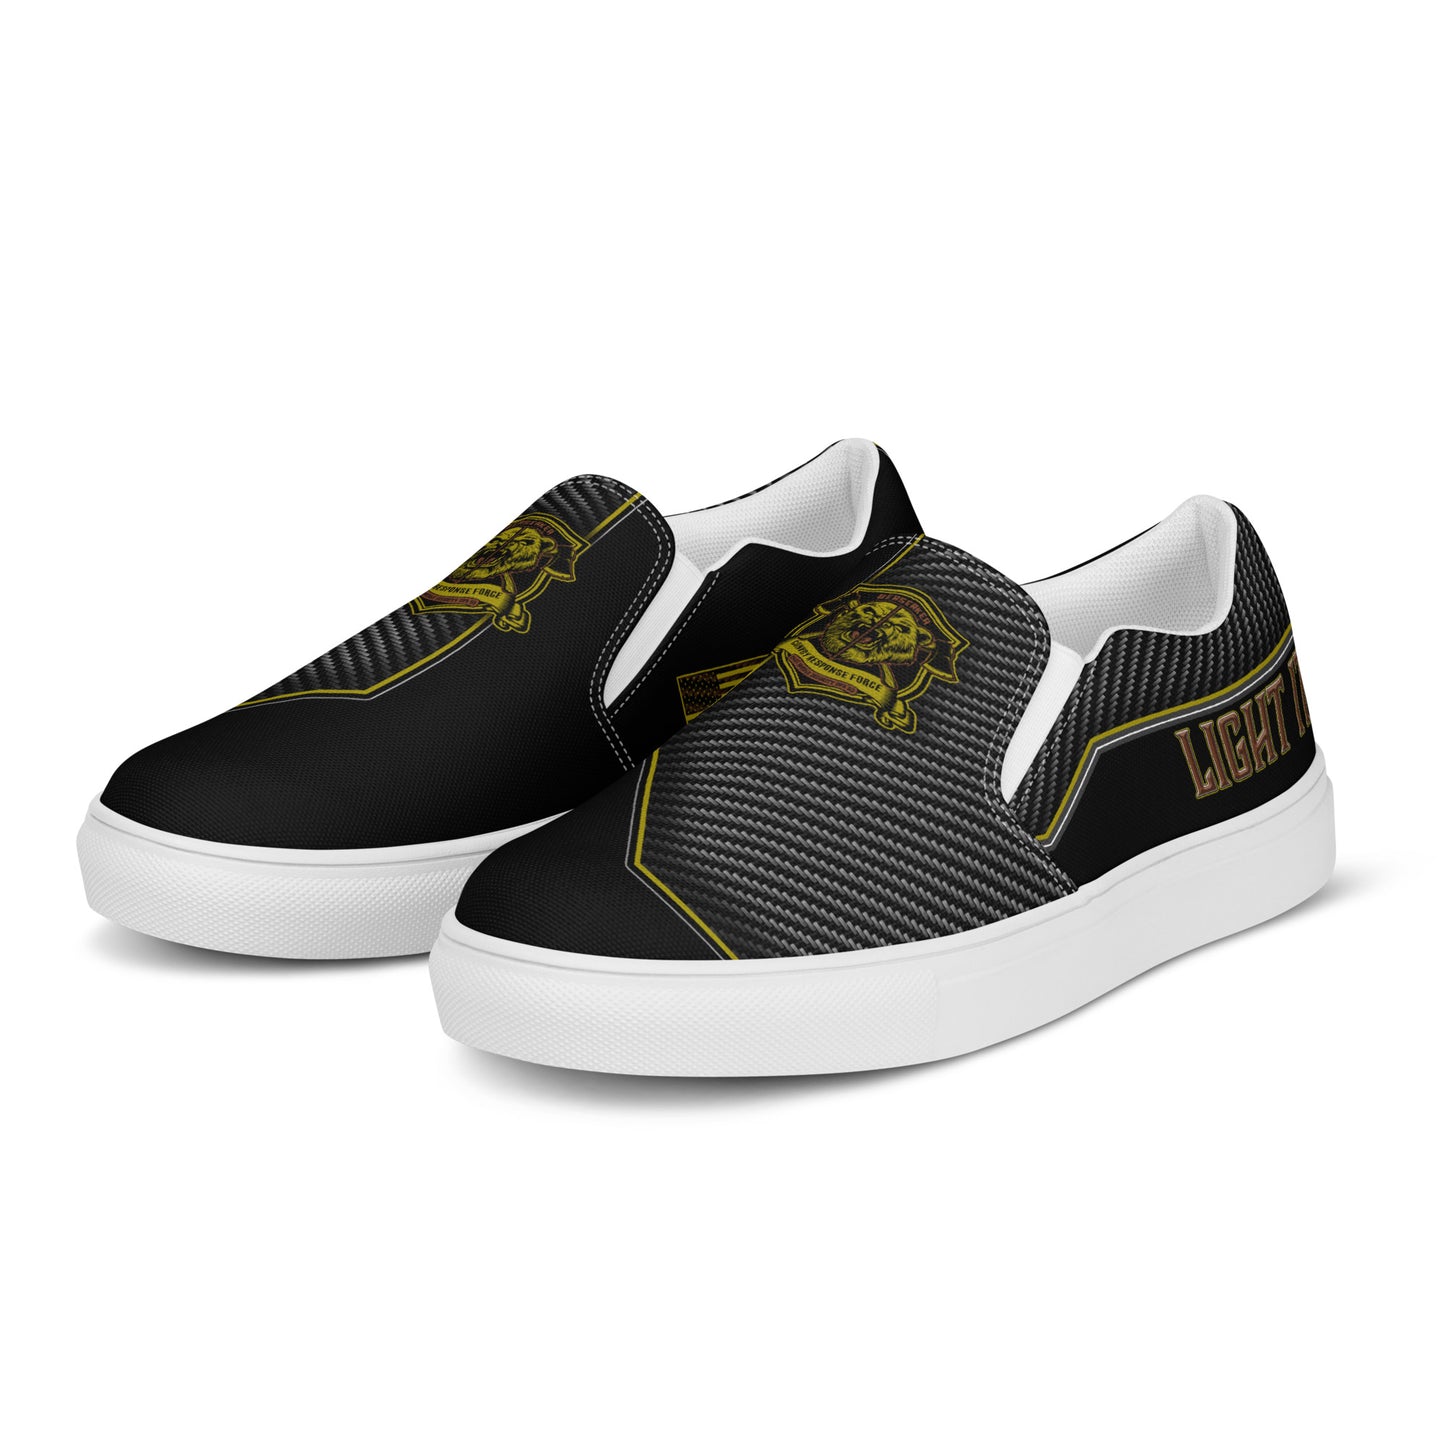 CRF Women’s Slip-on Canvas Shoes